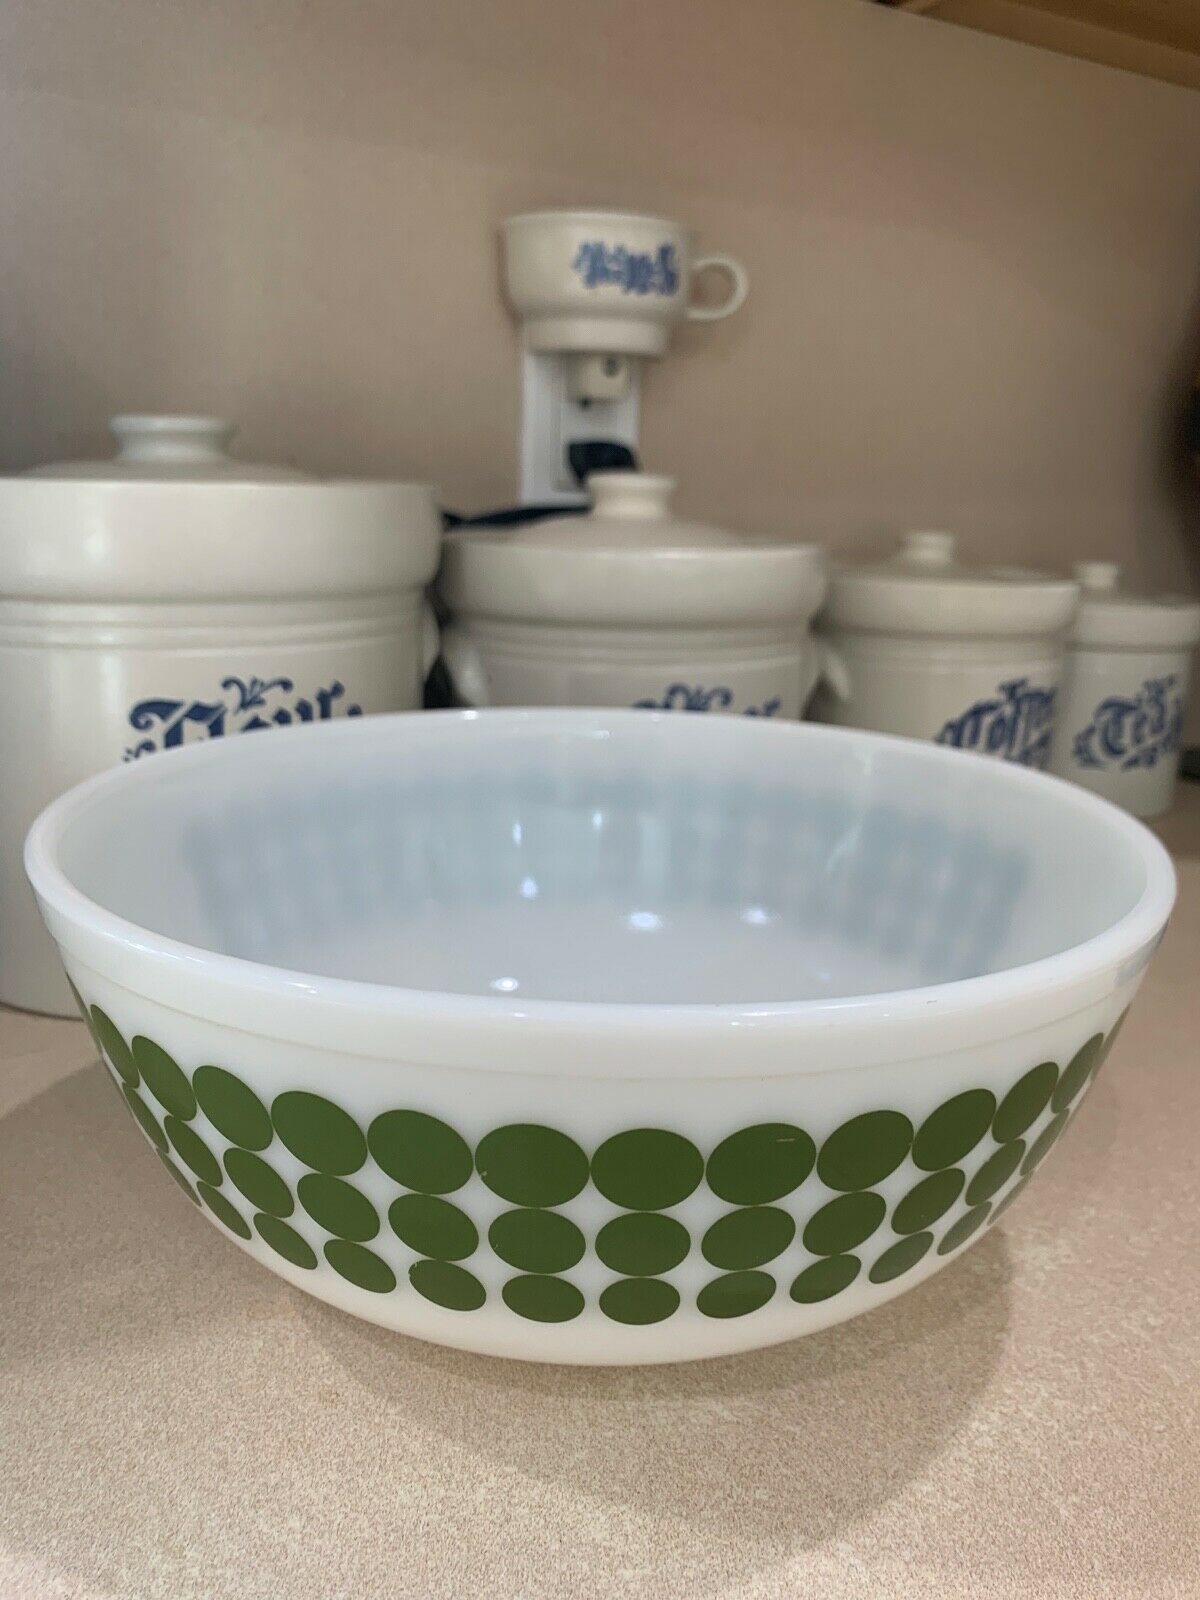 Vintage Pyrex No. 404 4 Qt. Green Dot Mixing Bowl Great Condition